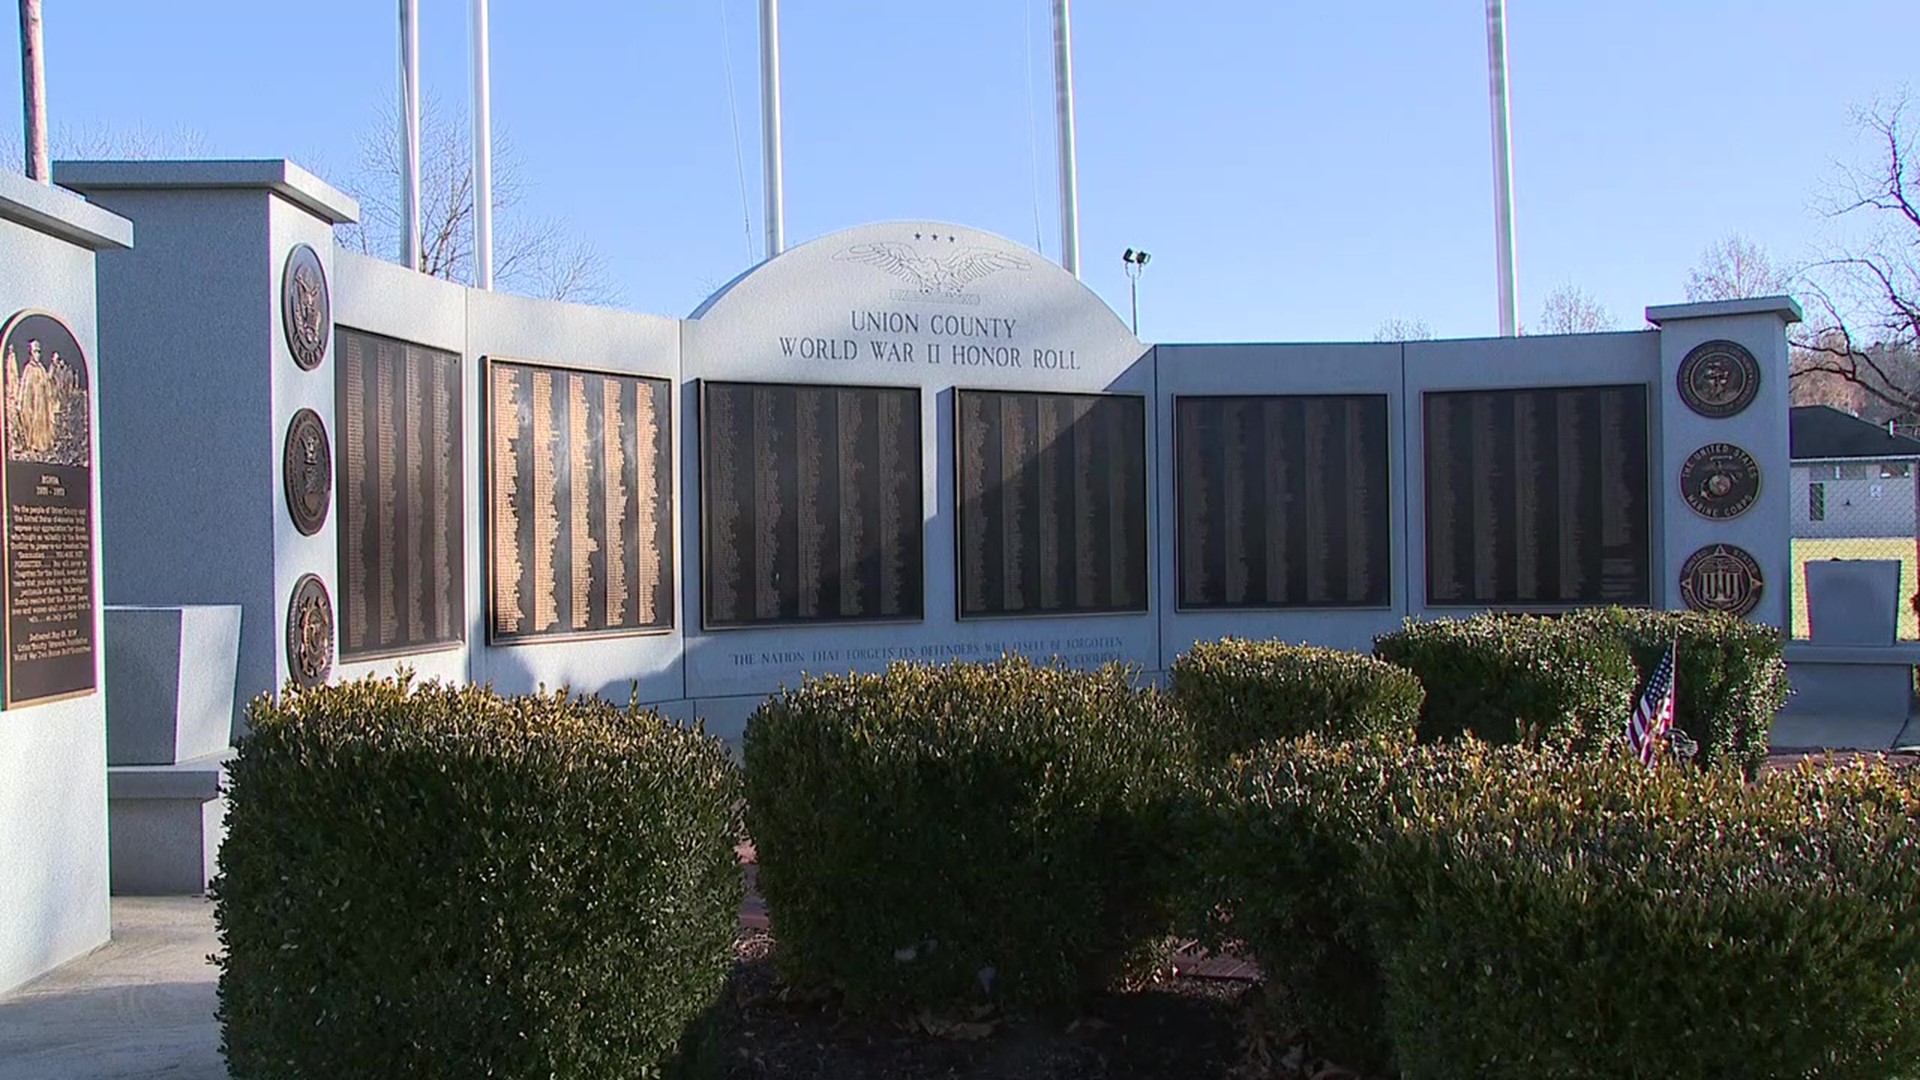 A memorial display in Union County that honors those who fought in World War II is in need of some help.